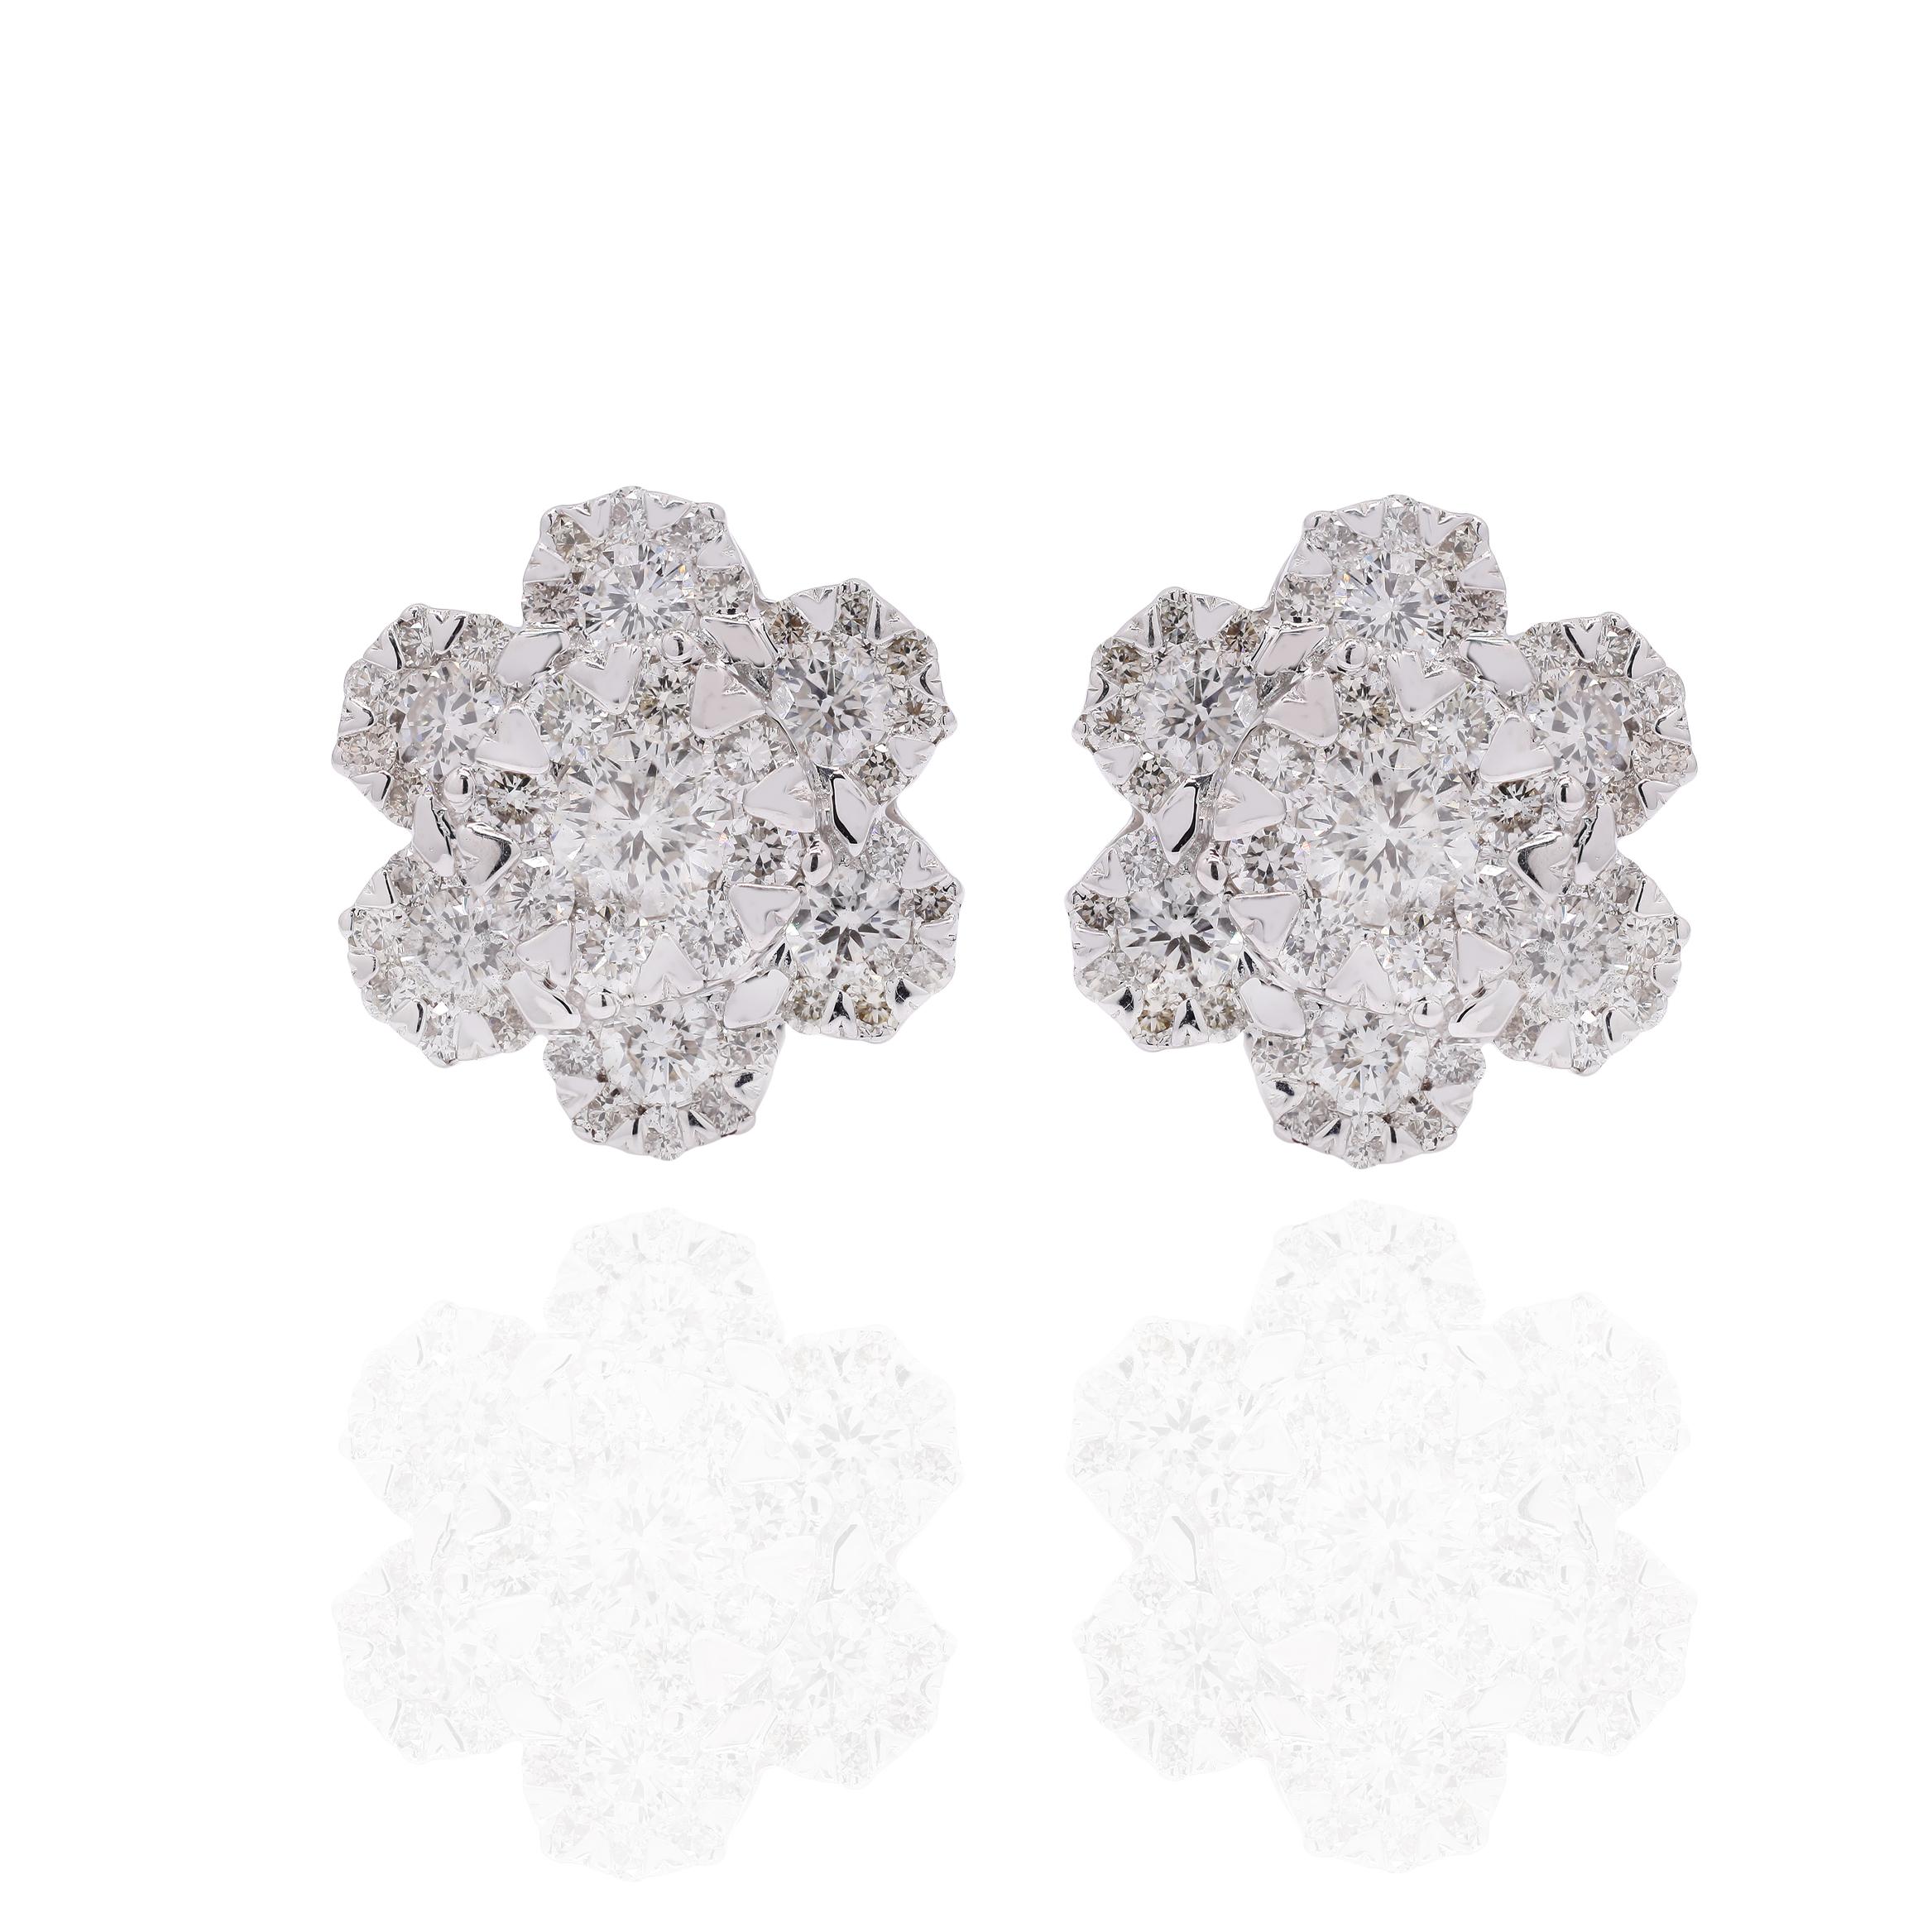 Earrings create a subtle beauty while showcasing the colors of the natural precious gemstones and illuminating diamonds making a statement.
Round cut Diamond Stud earrings in 18K gold. Embrace your look with these stunning pair of earrings suitable